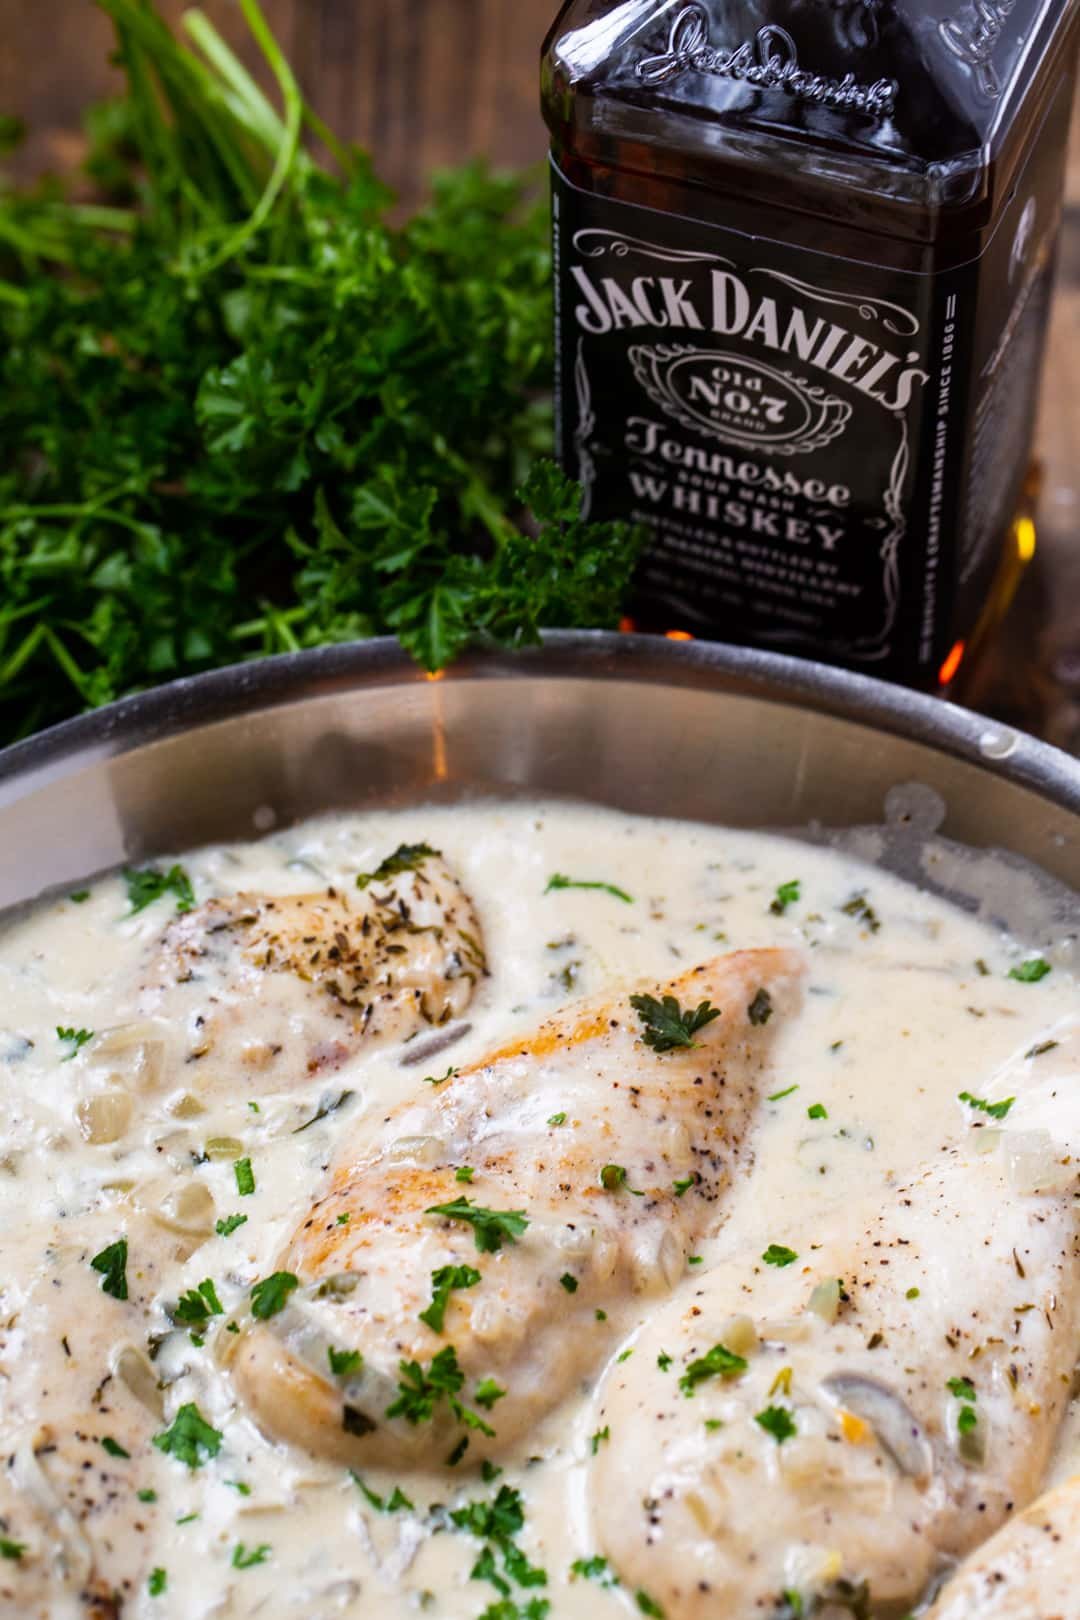 Chicken and creamy sauce in skillet and bottle of Jack Daniels.